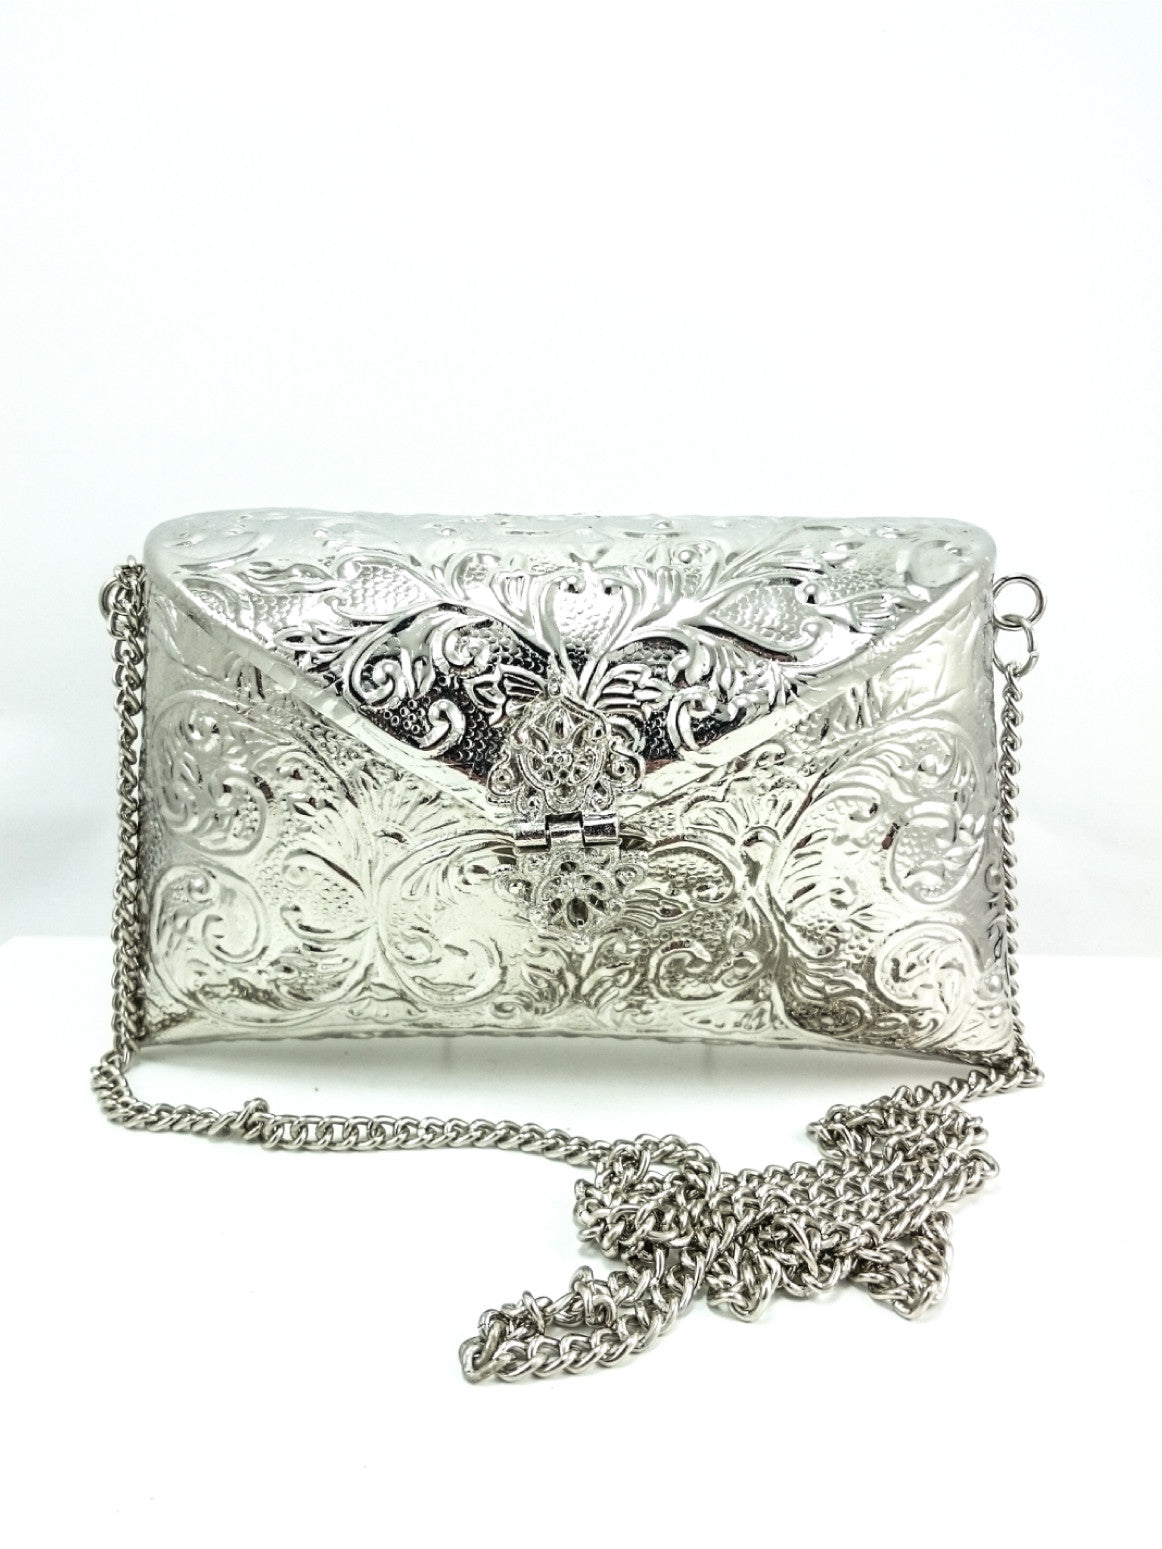 Buy German Silver Purse,unique Metal Clutch Purse From the Indian  Craftsmen, Handmade Vintage Hand Clutch. Online in India - Etsy